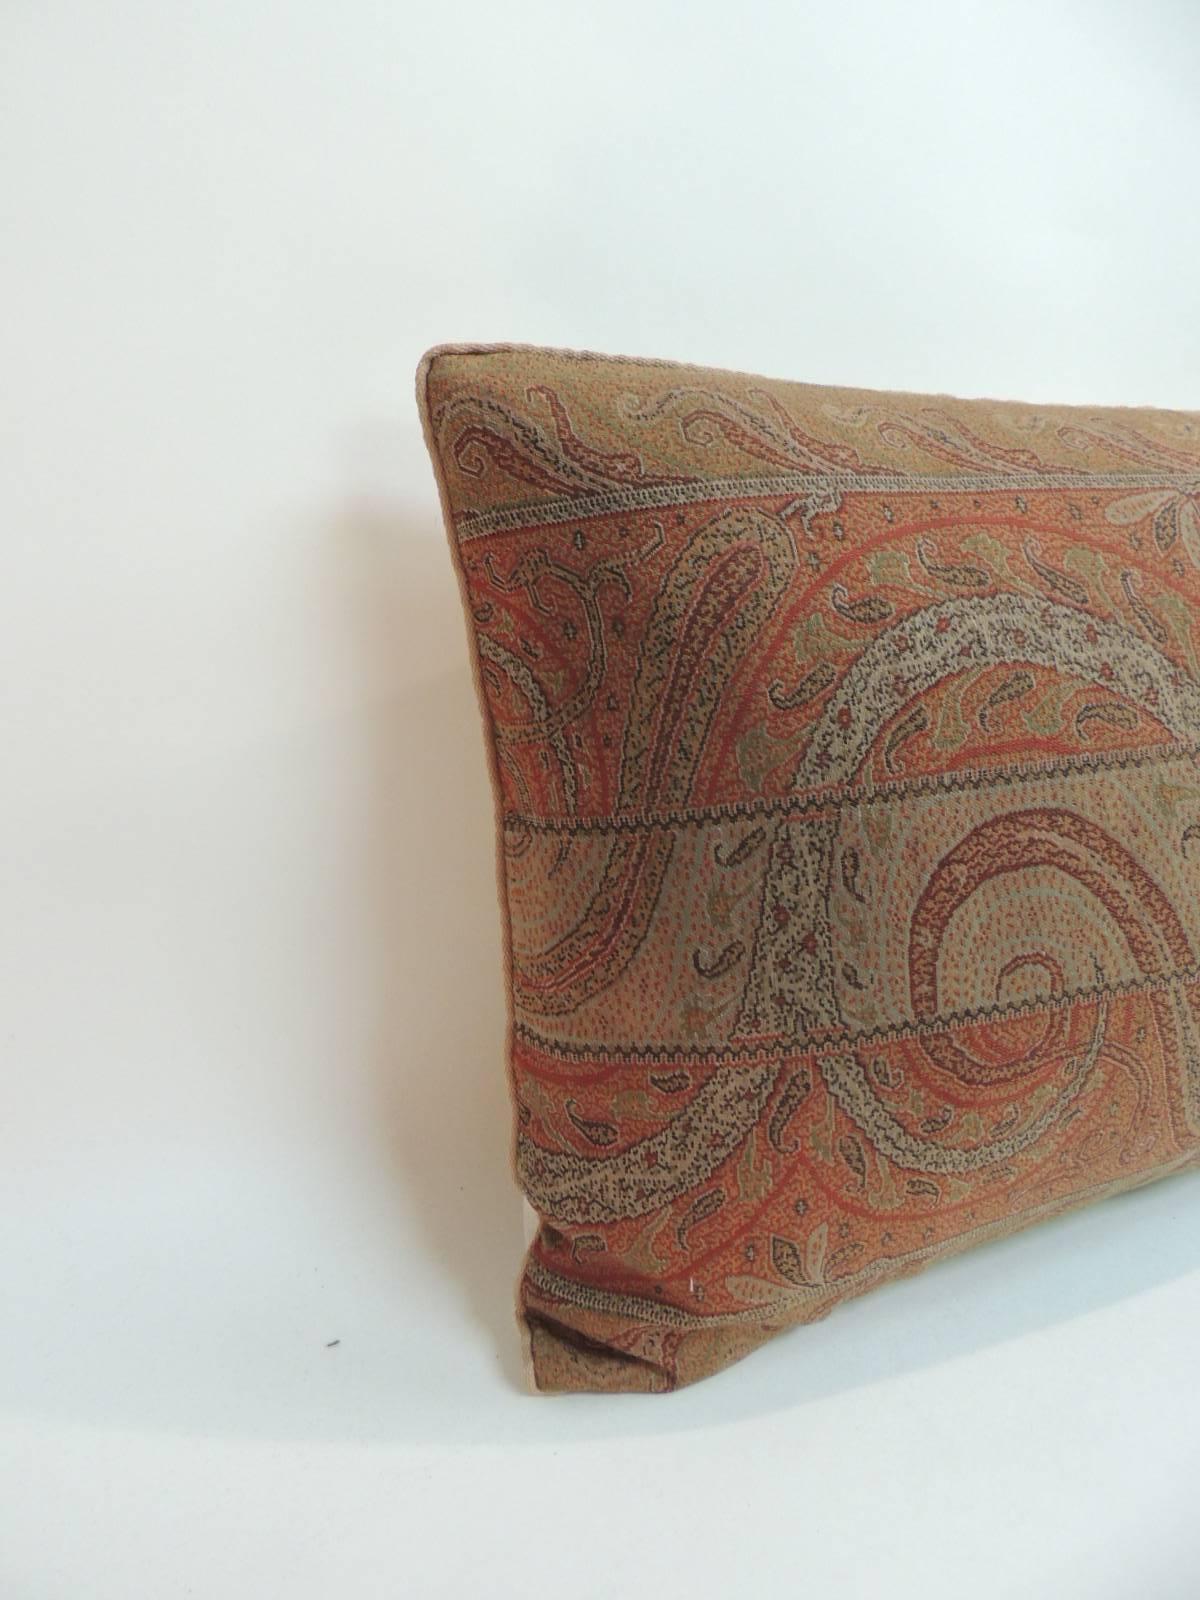 Antique wool paisley Lumbar pillow, embellished with small tan rope trim all around and textured tan linen backing. In shades of green, red, brown, orange, brown, black and yellow.
Needle embroidery. handcrafted decorative pillow made with a textile